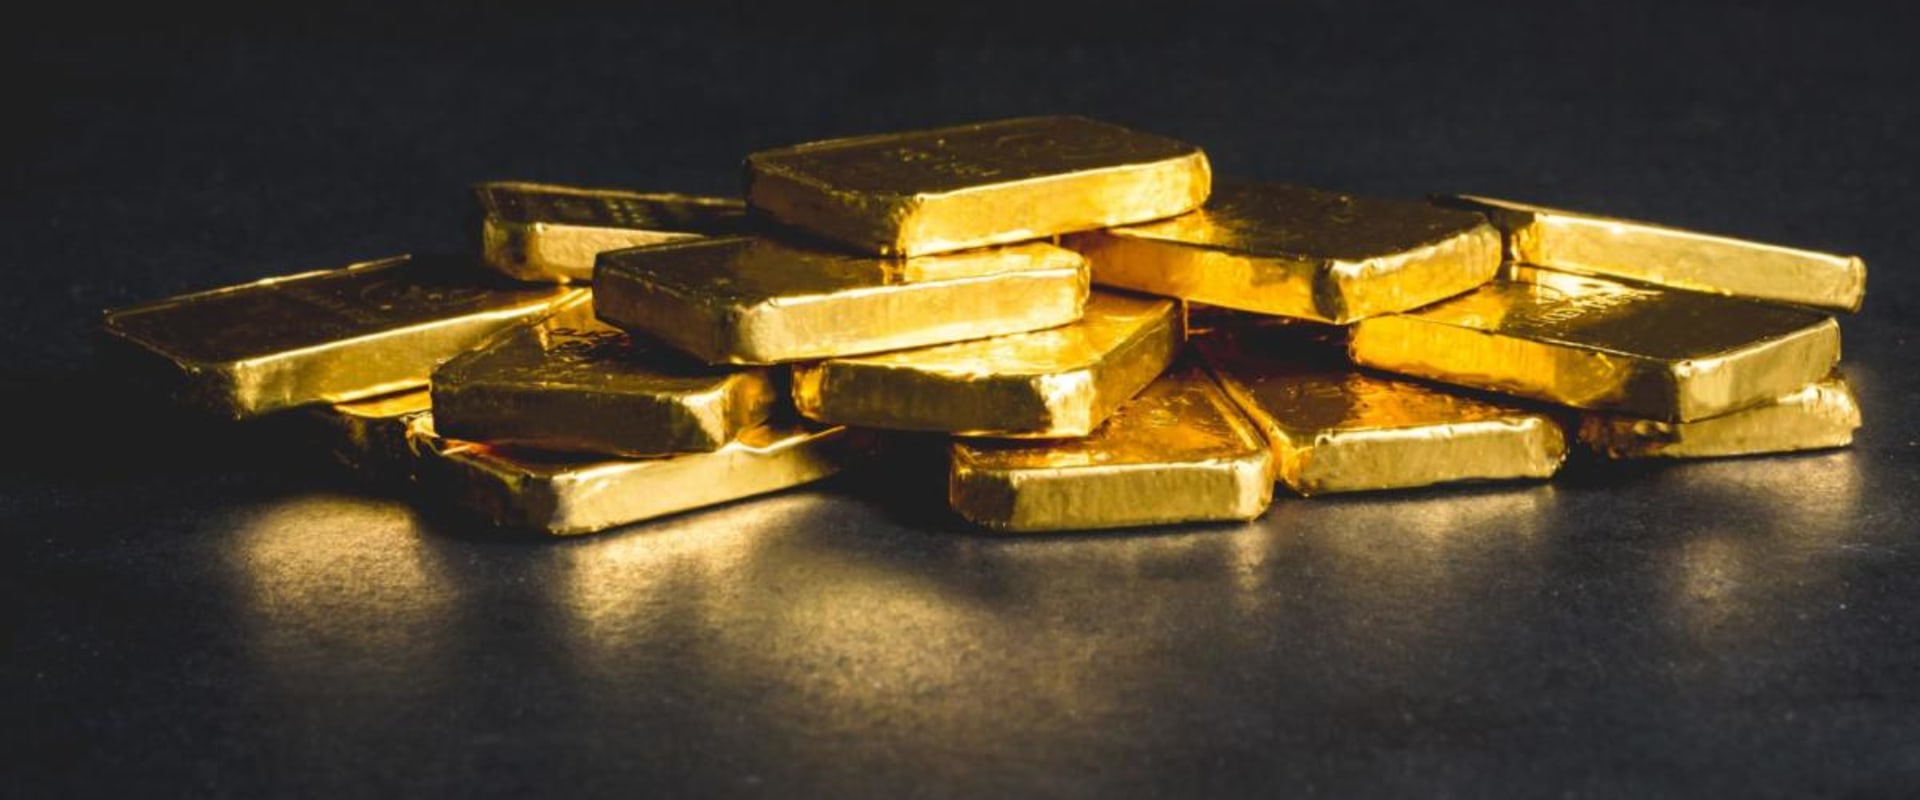 What is the underlying portfolio for gold mutual fund?